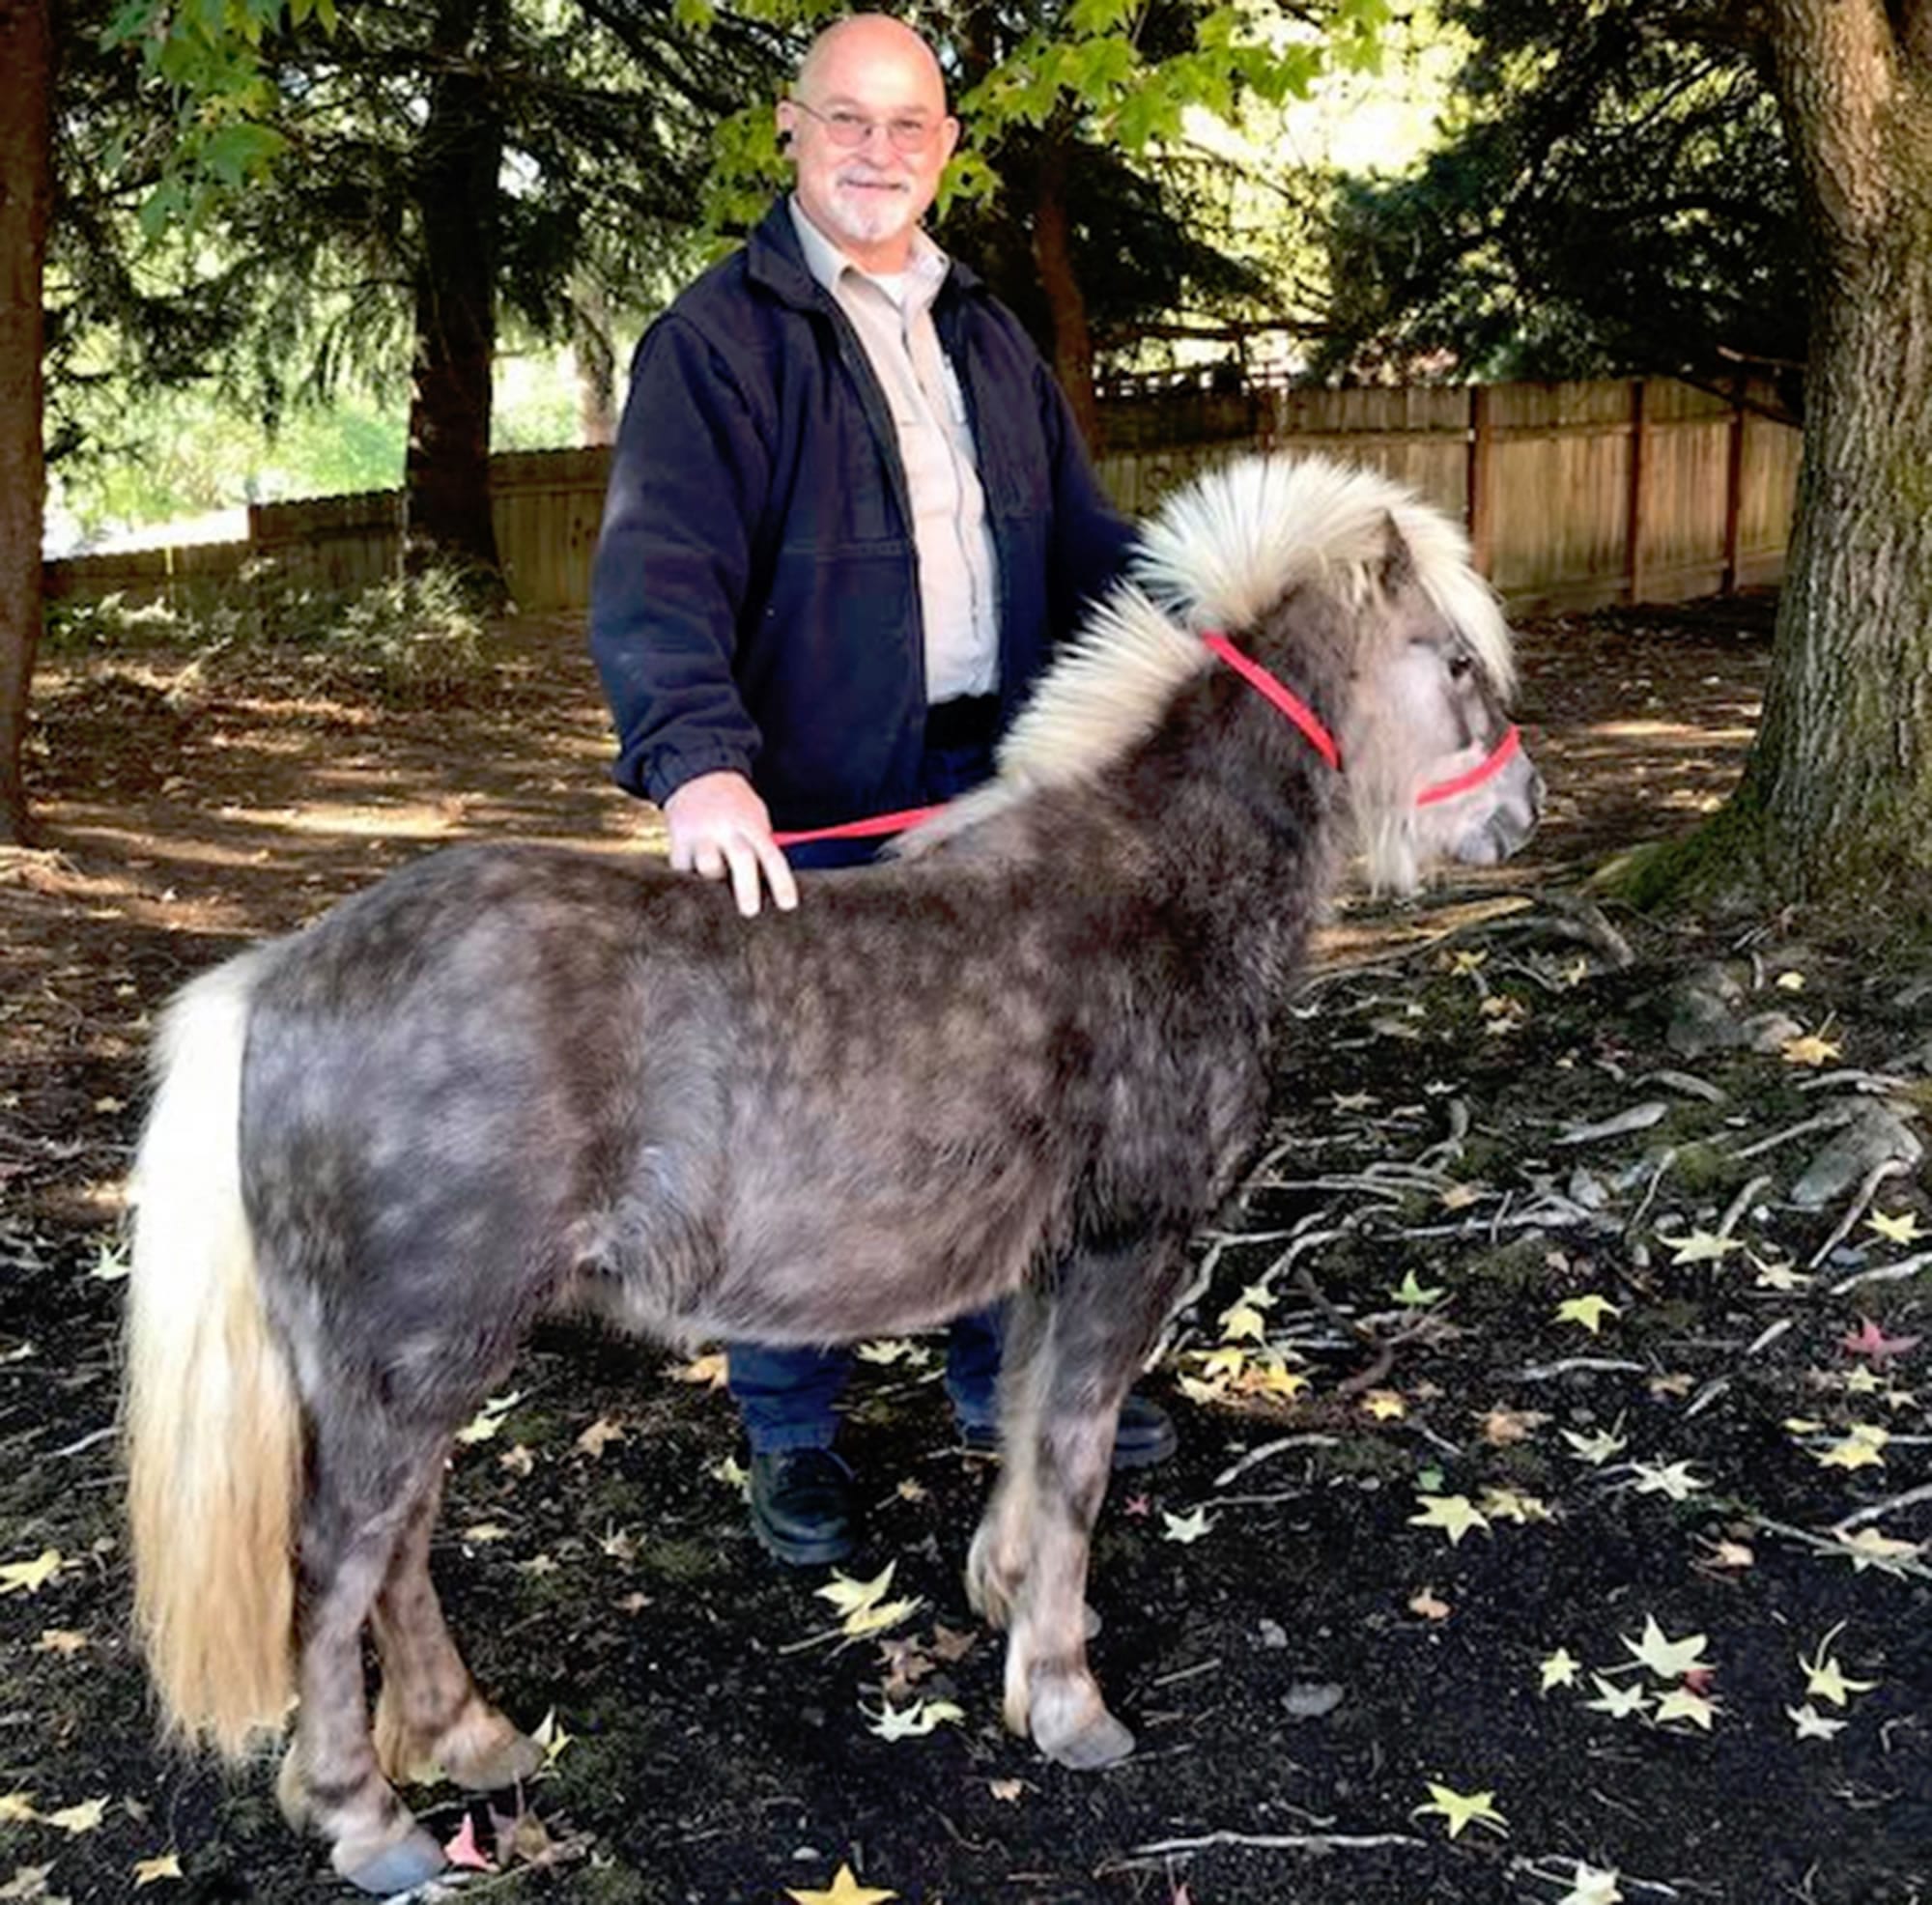 Bill Burrus, field officer for Clark County Animal Protection and Control, holds a pony found Monday at the Vancouver Village shopping area near the Vancouver Mall. The pony was reported on the loose about 11 a.m. but was quickly contained by Vancouver police officers and troopers with the Washington State Patrol.